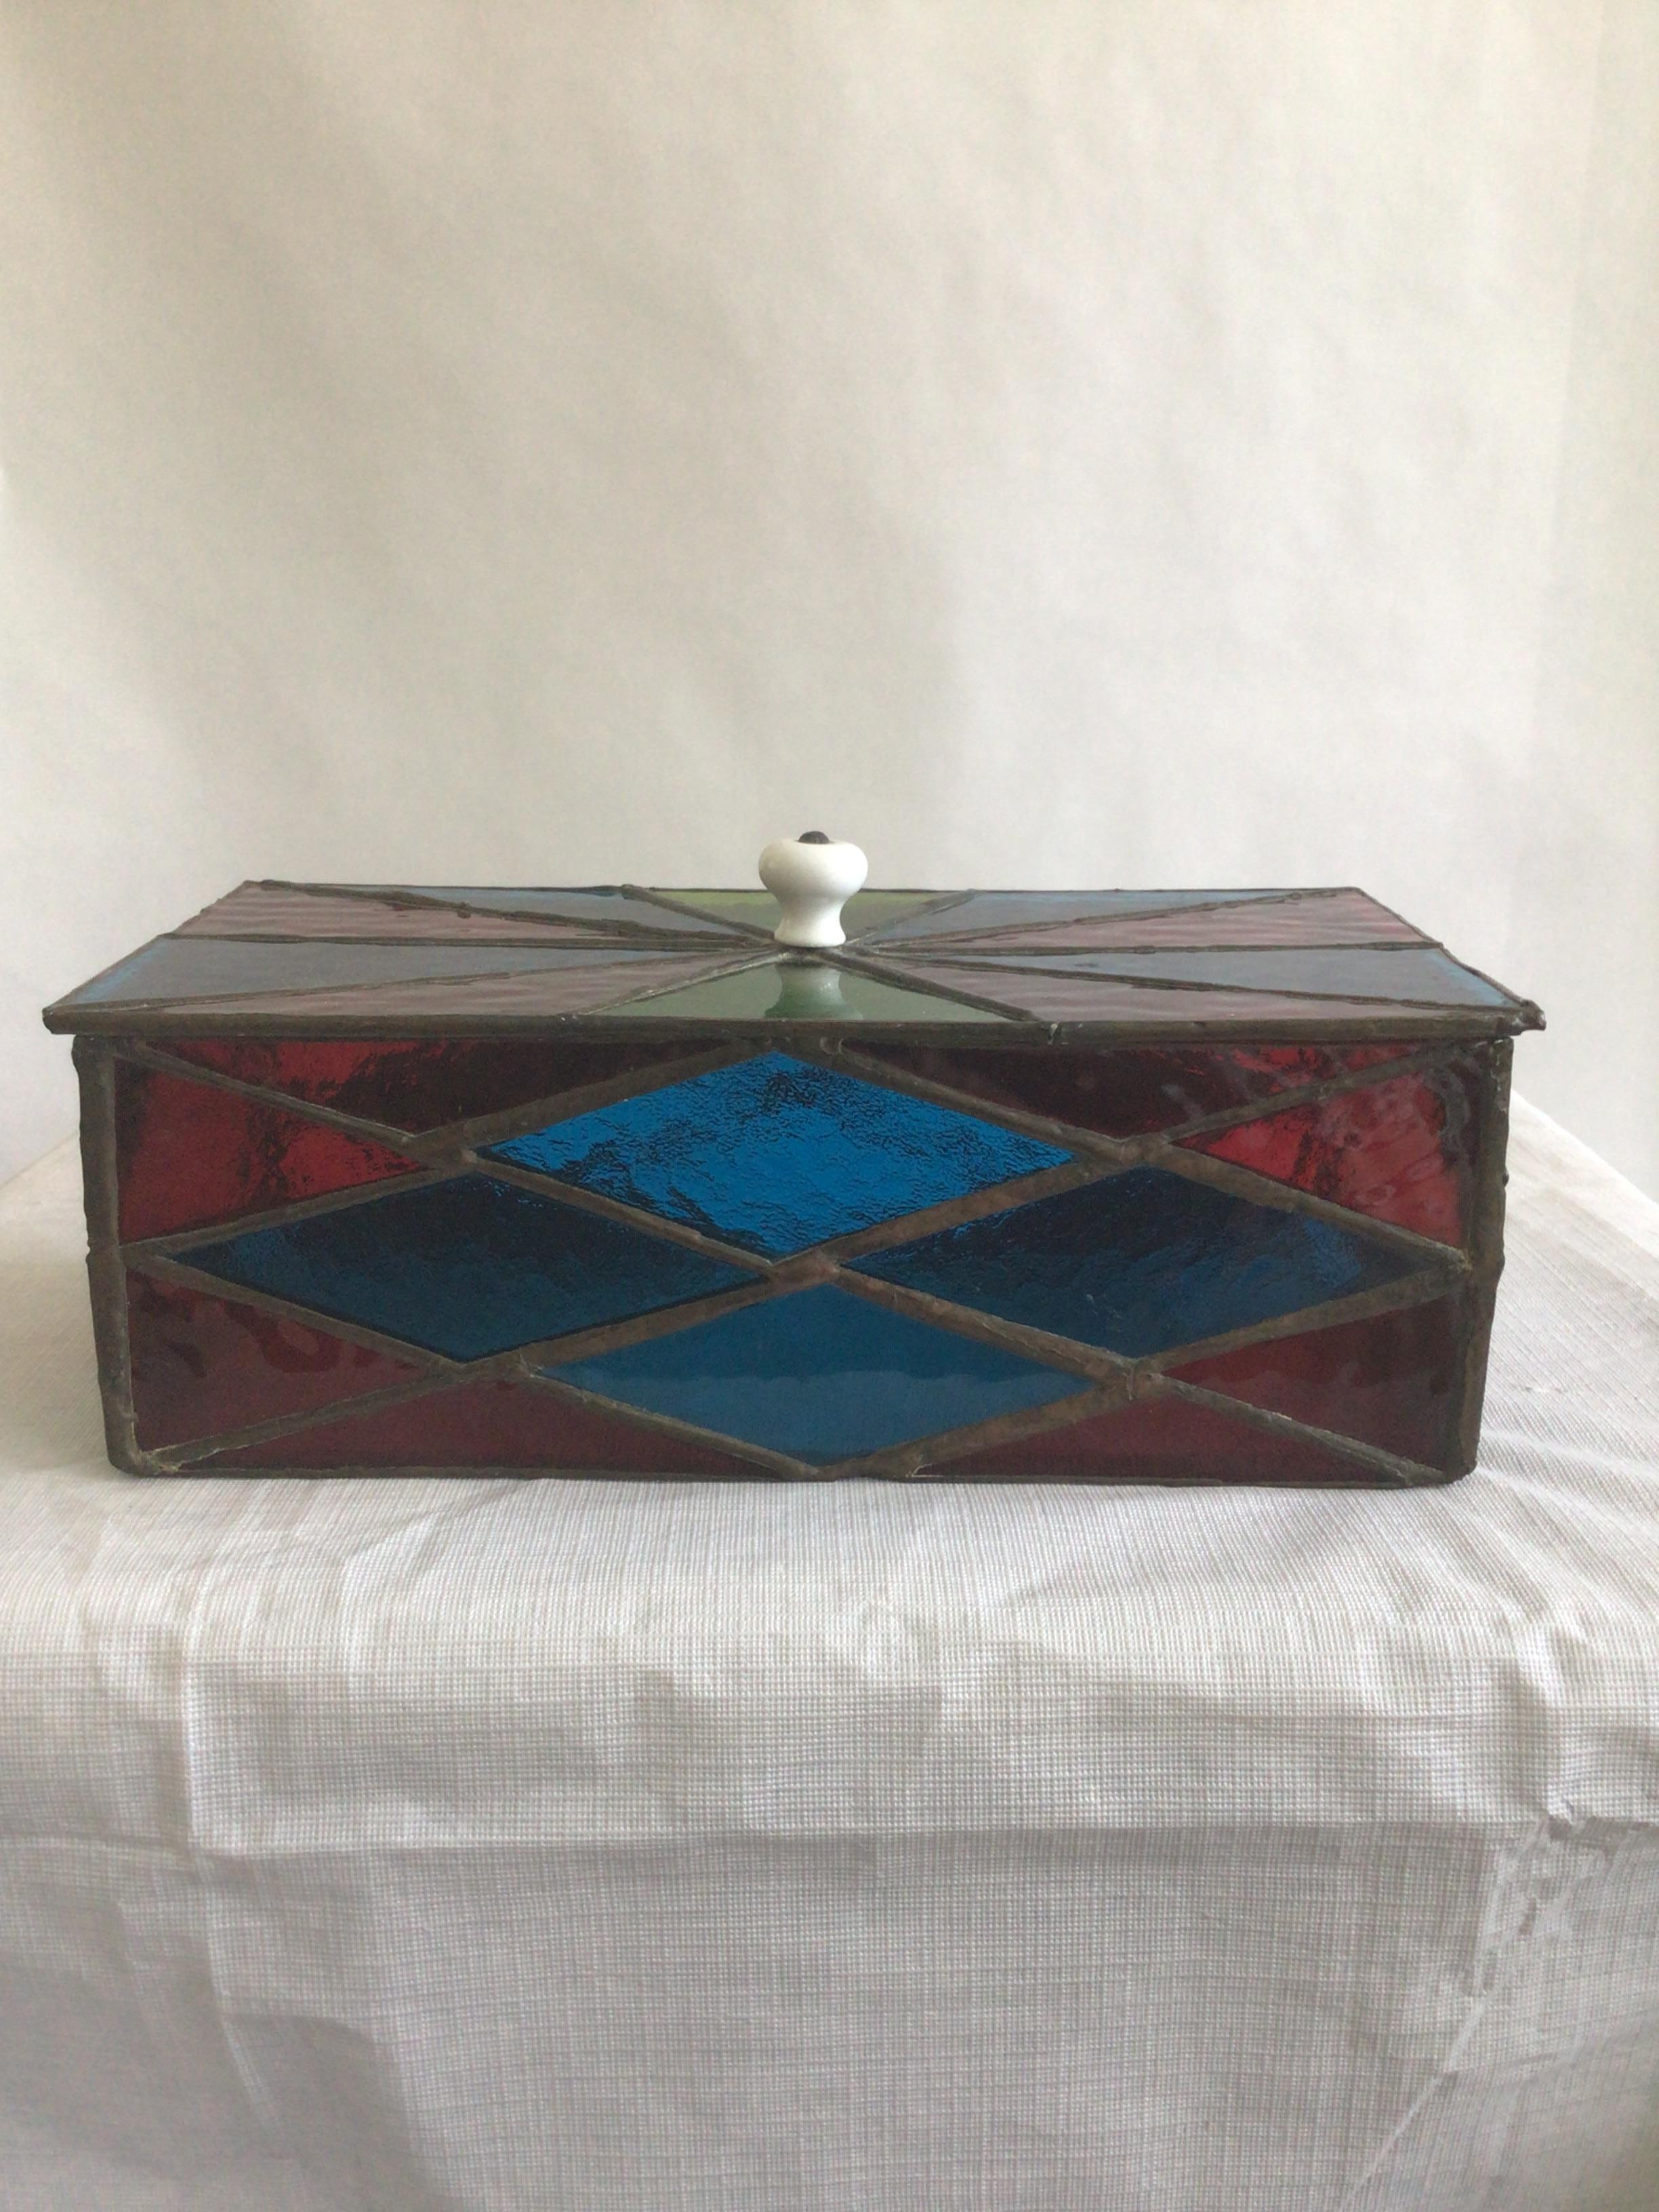 1950s Colorful Leaded Stained Glass Box With Removable Lid
Glass colors: blue, green, red, clear glass bottom
Removable lid has a white knob handle
